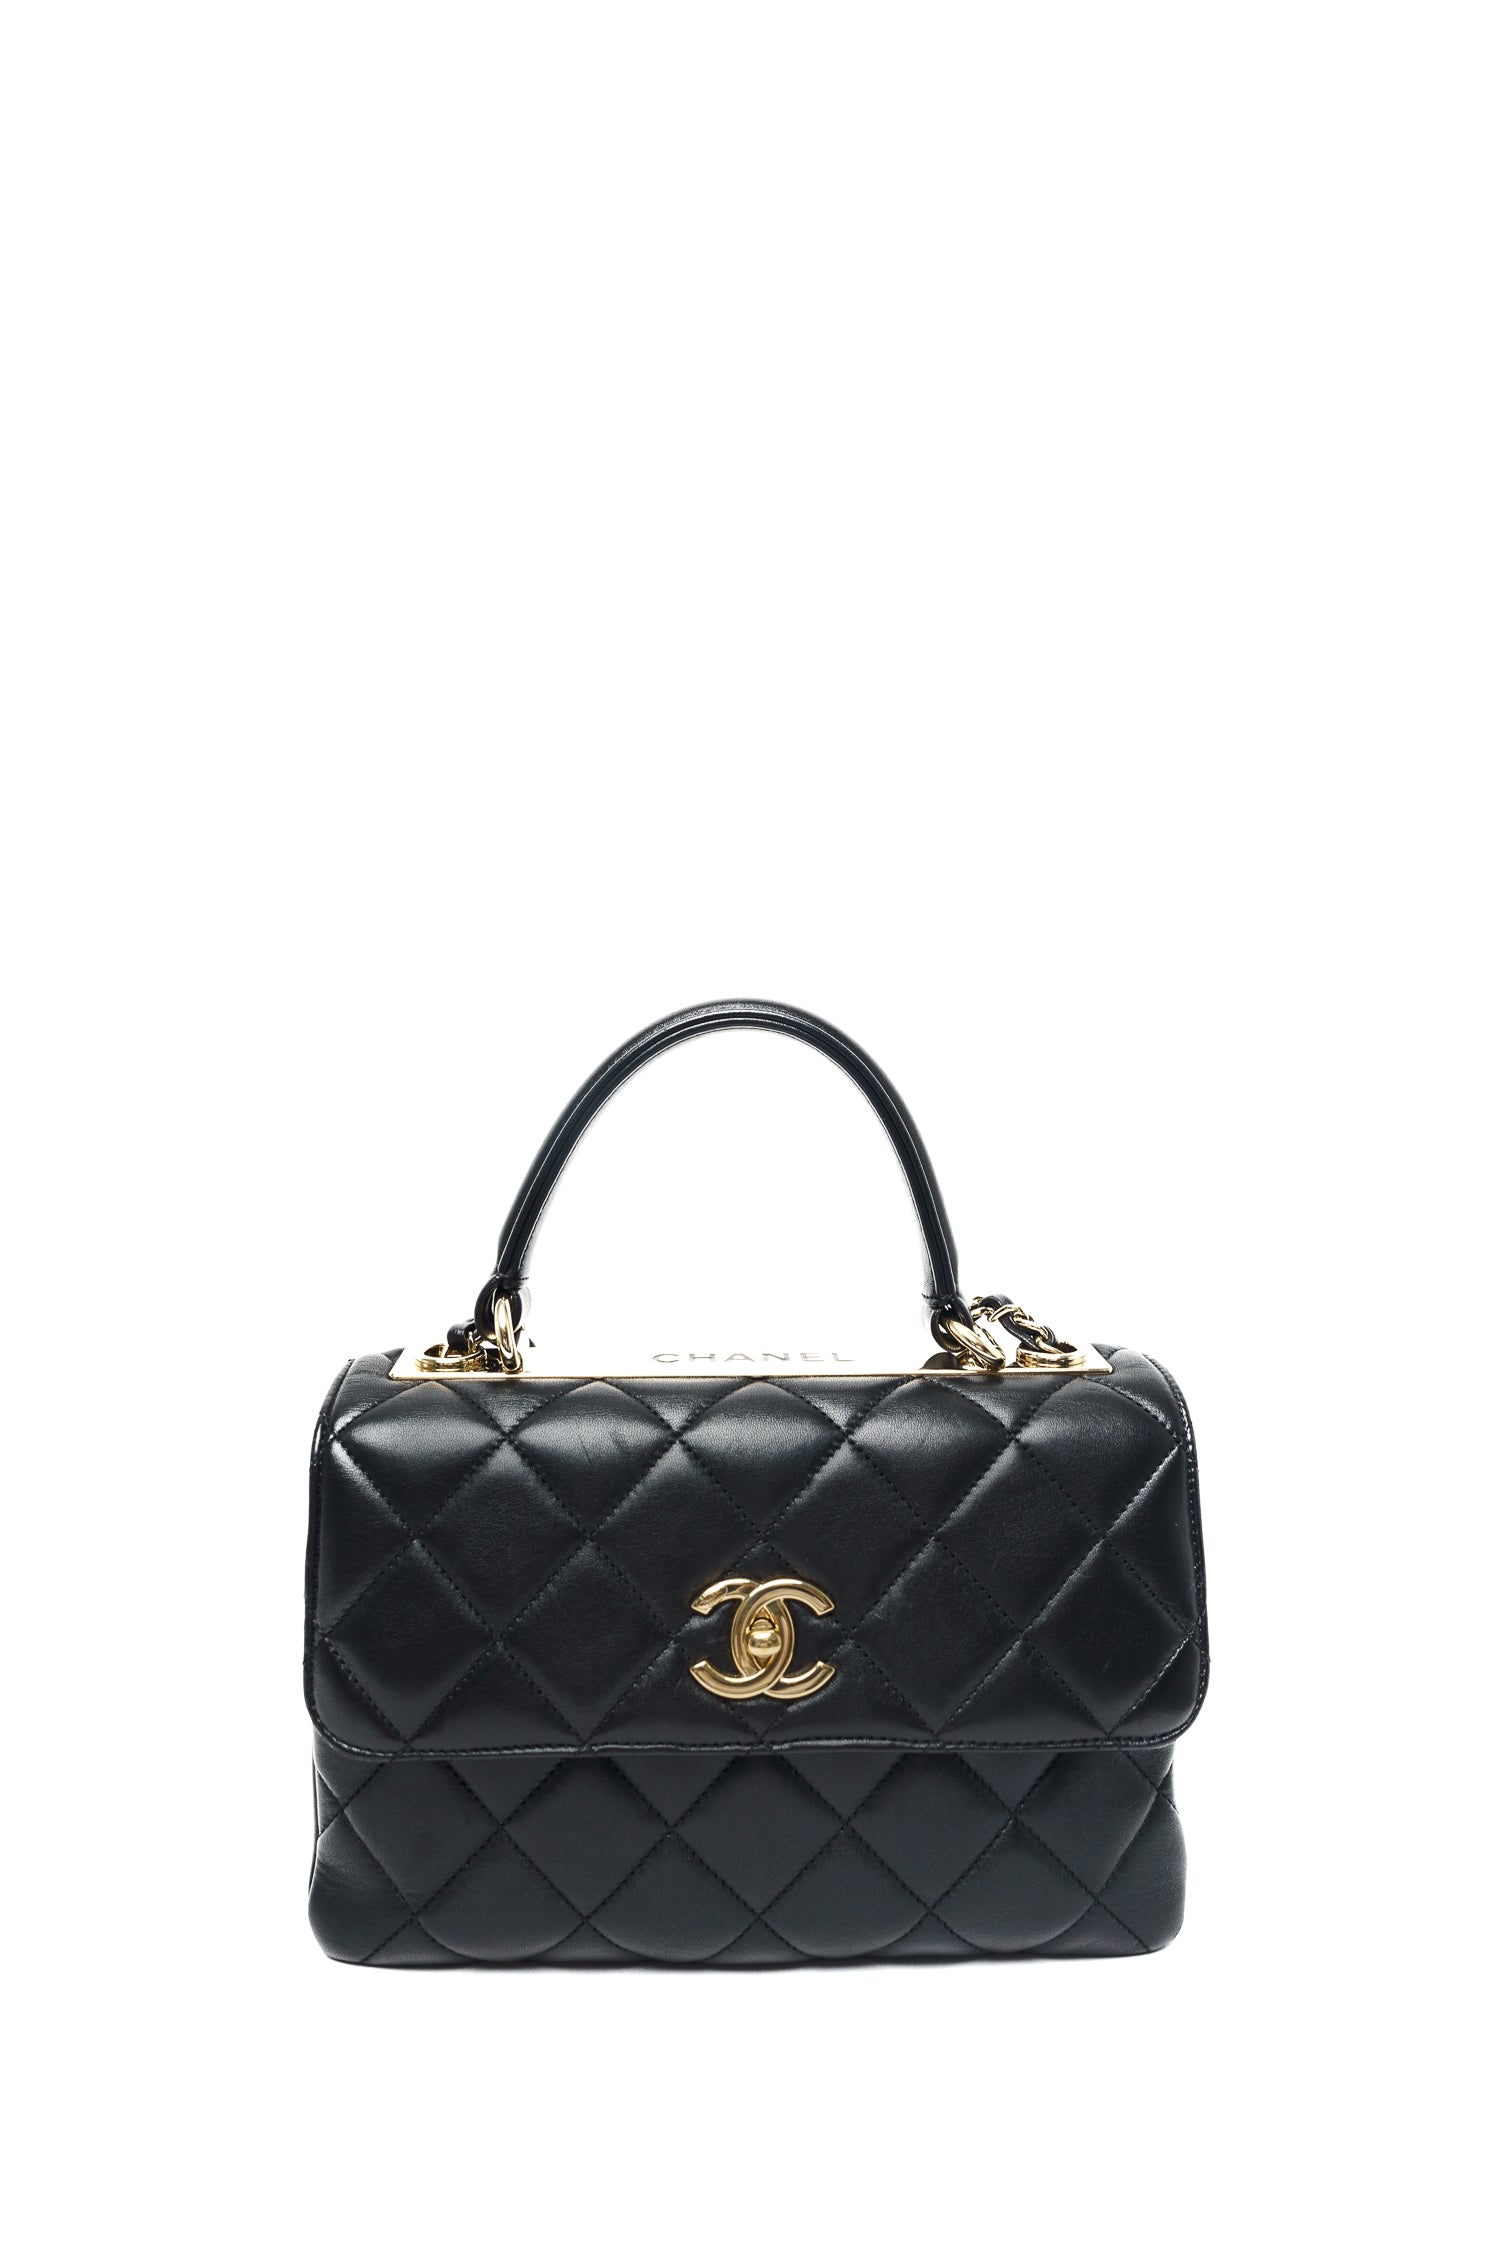 Chanel Black CC Top Handle Bag – Once More Luxury